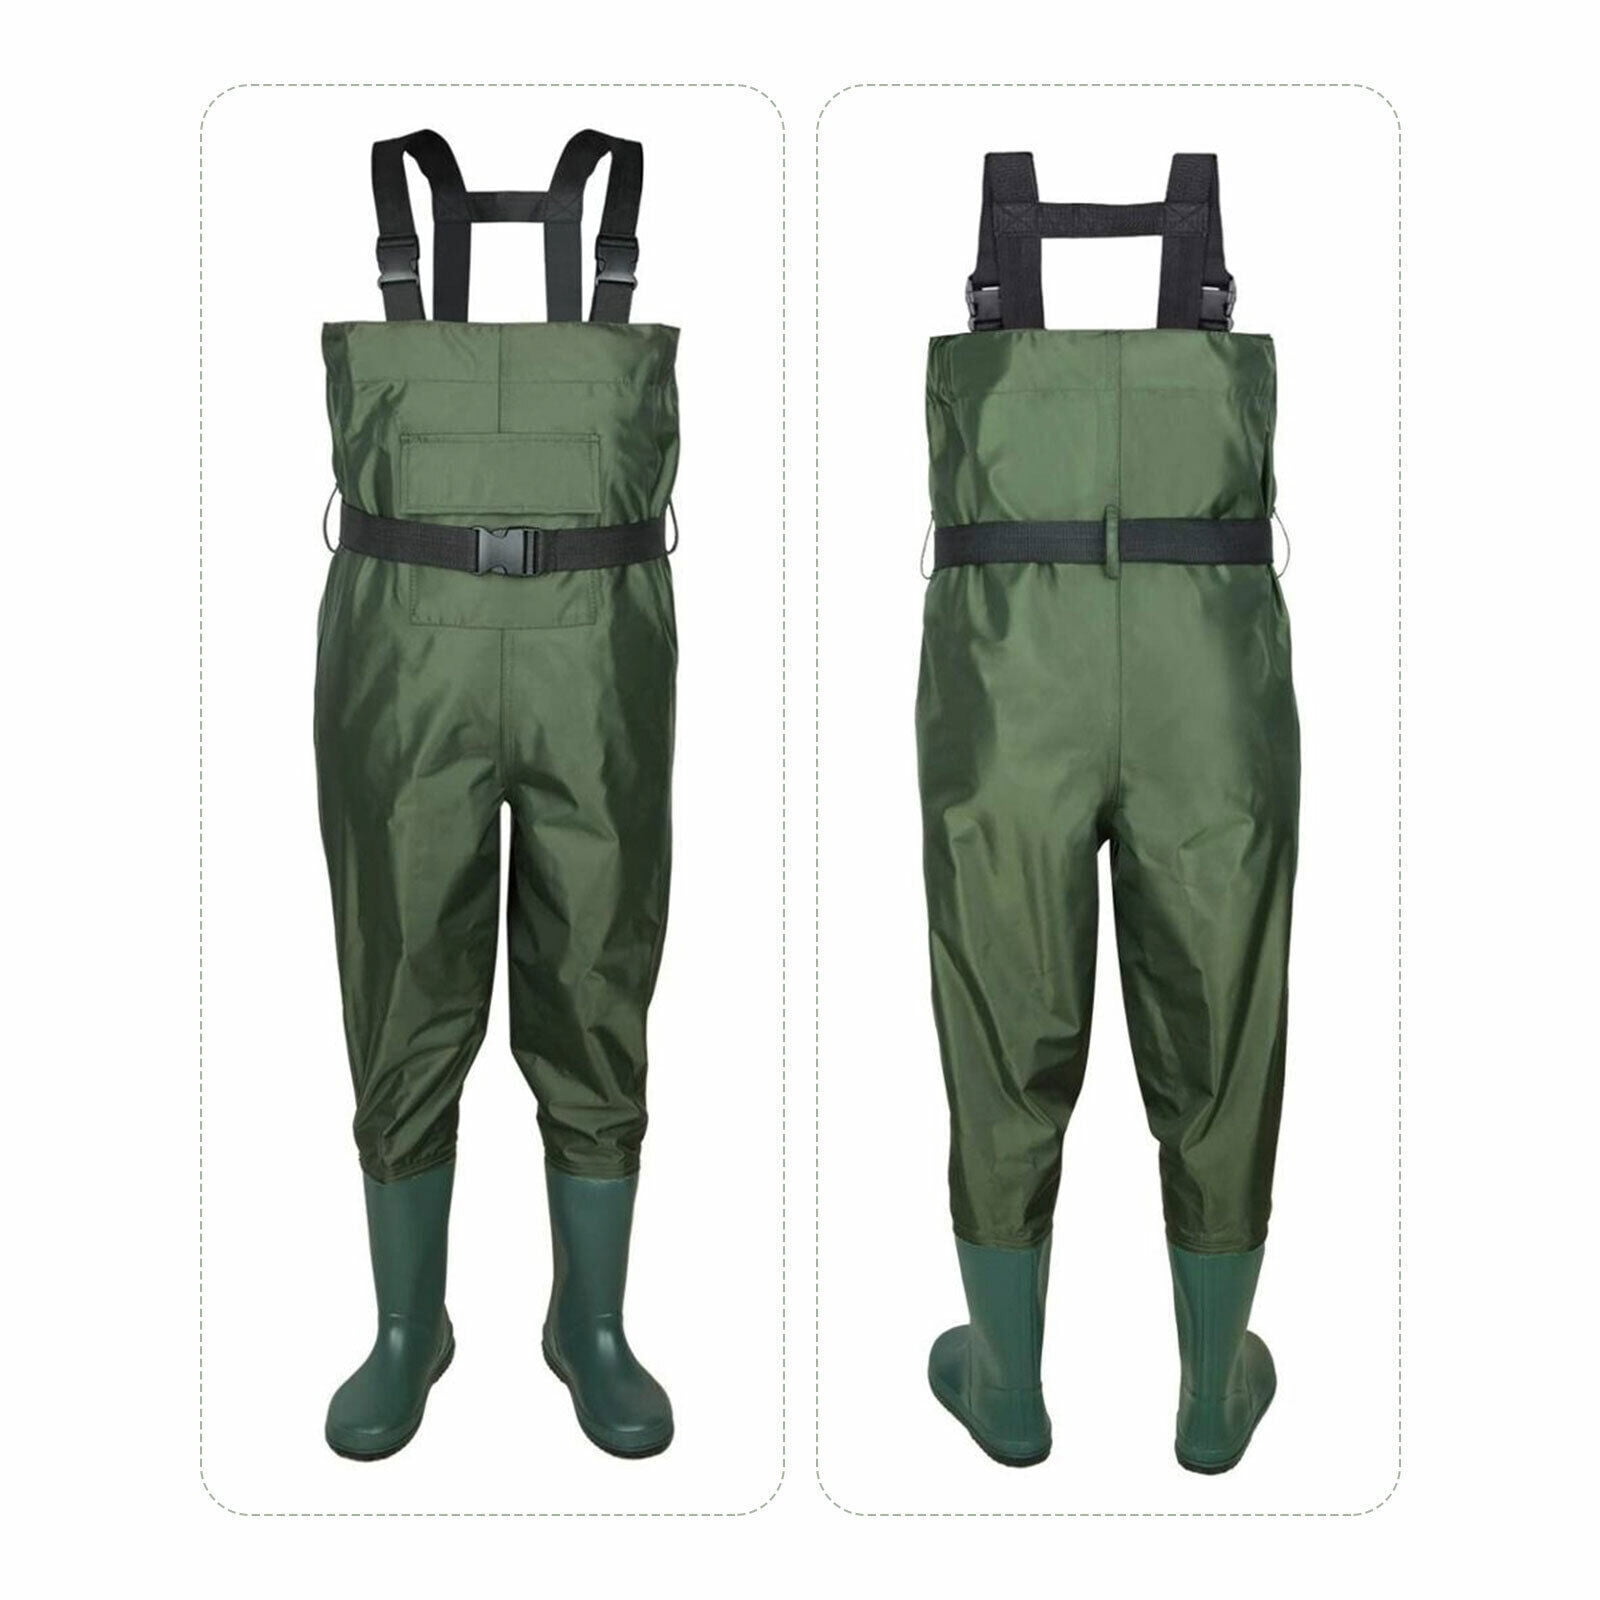 WSYW Waterproof Chest Waders Nylon 2-Ply Rubber Bootfoot for Hunting Fishing  Green US Size 6 